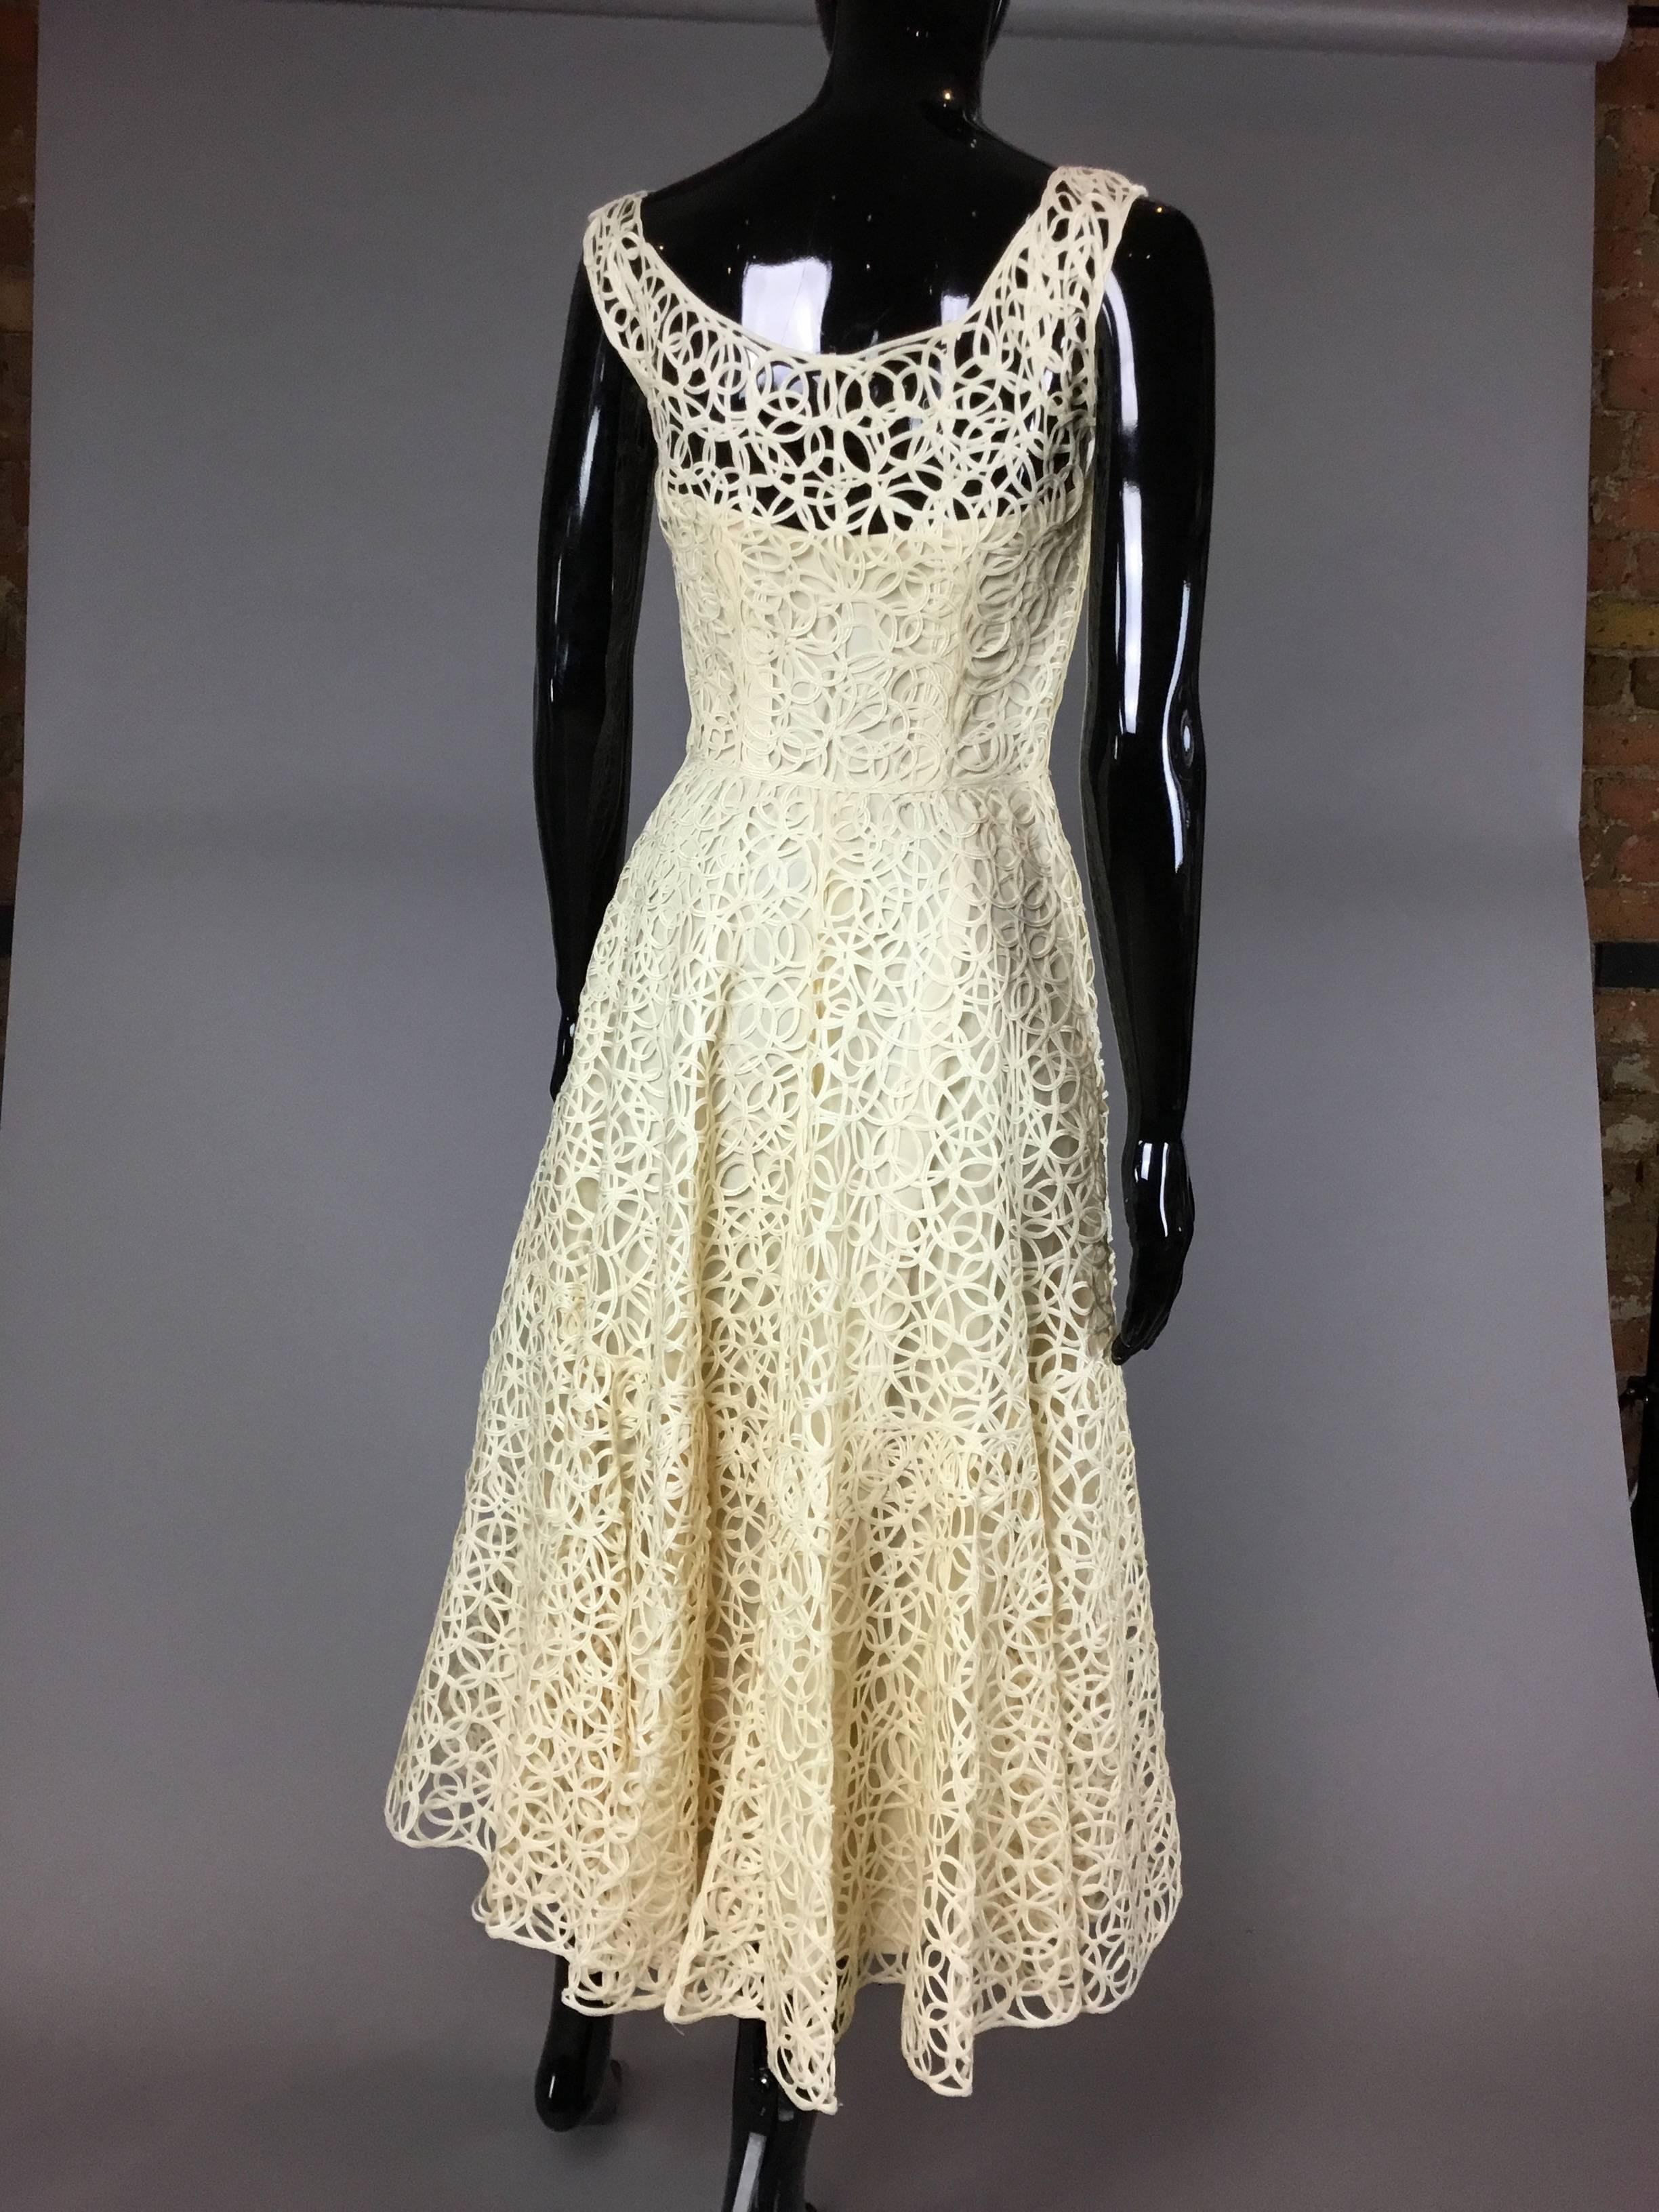 an incredible cream 50s dress constructed entirely from a looped ribbon material. It has an integral lining with corset like boning at the waist and bust, and a side zip. The skirt is full towards the hem, creating a lovely feminine shape. 